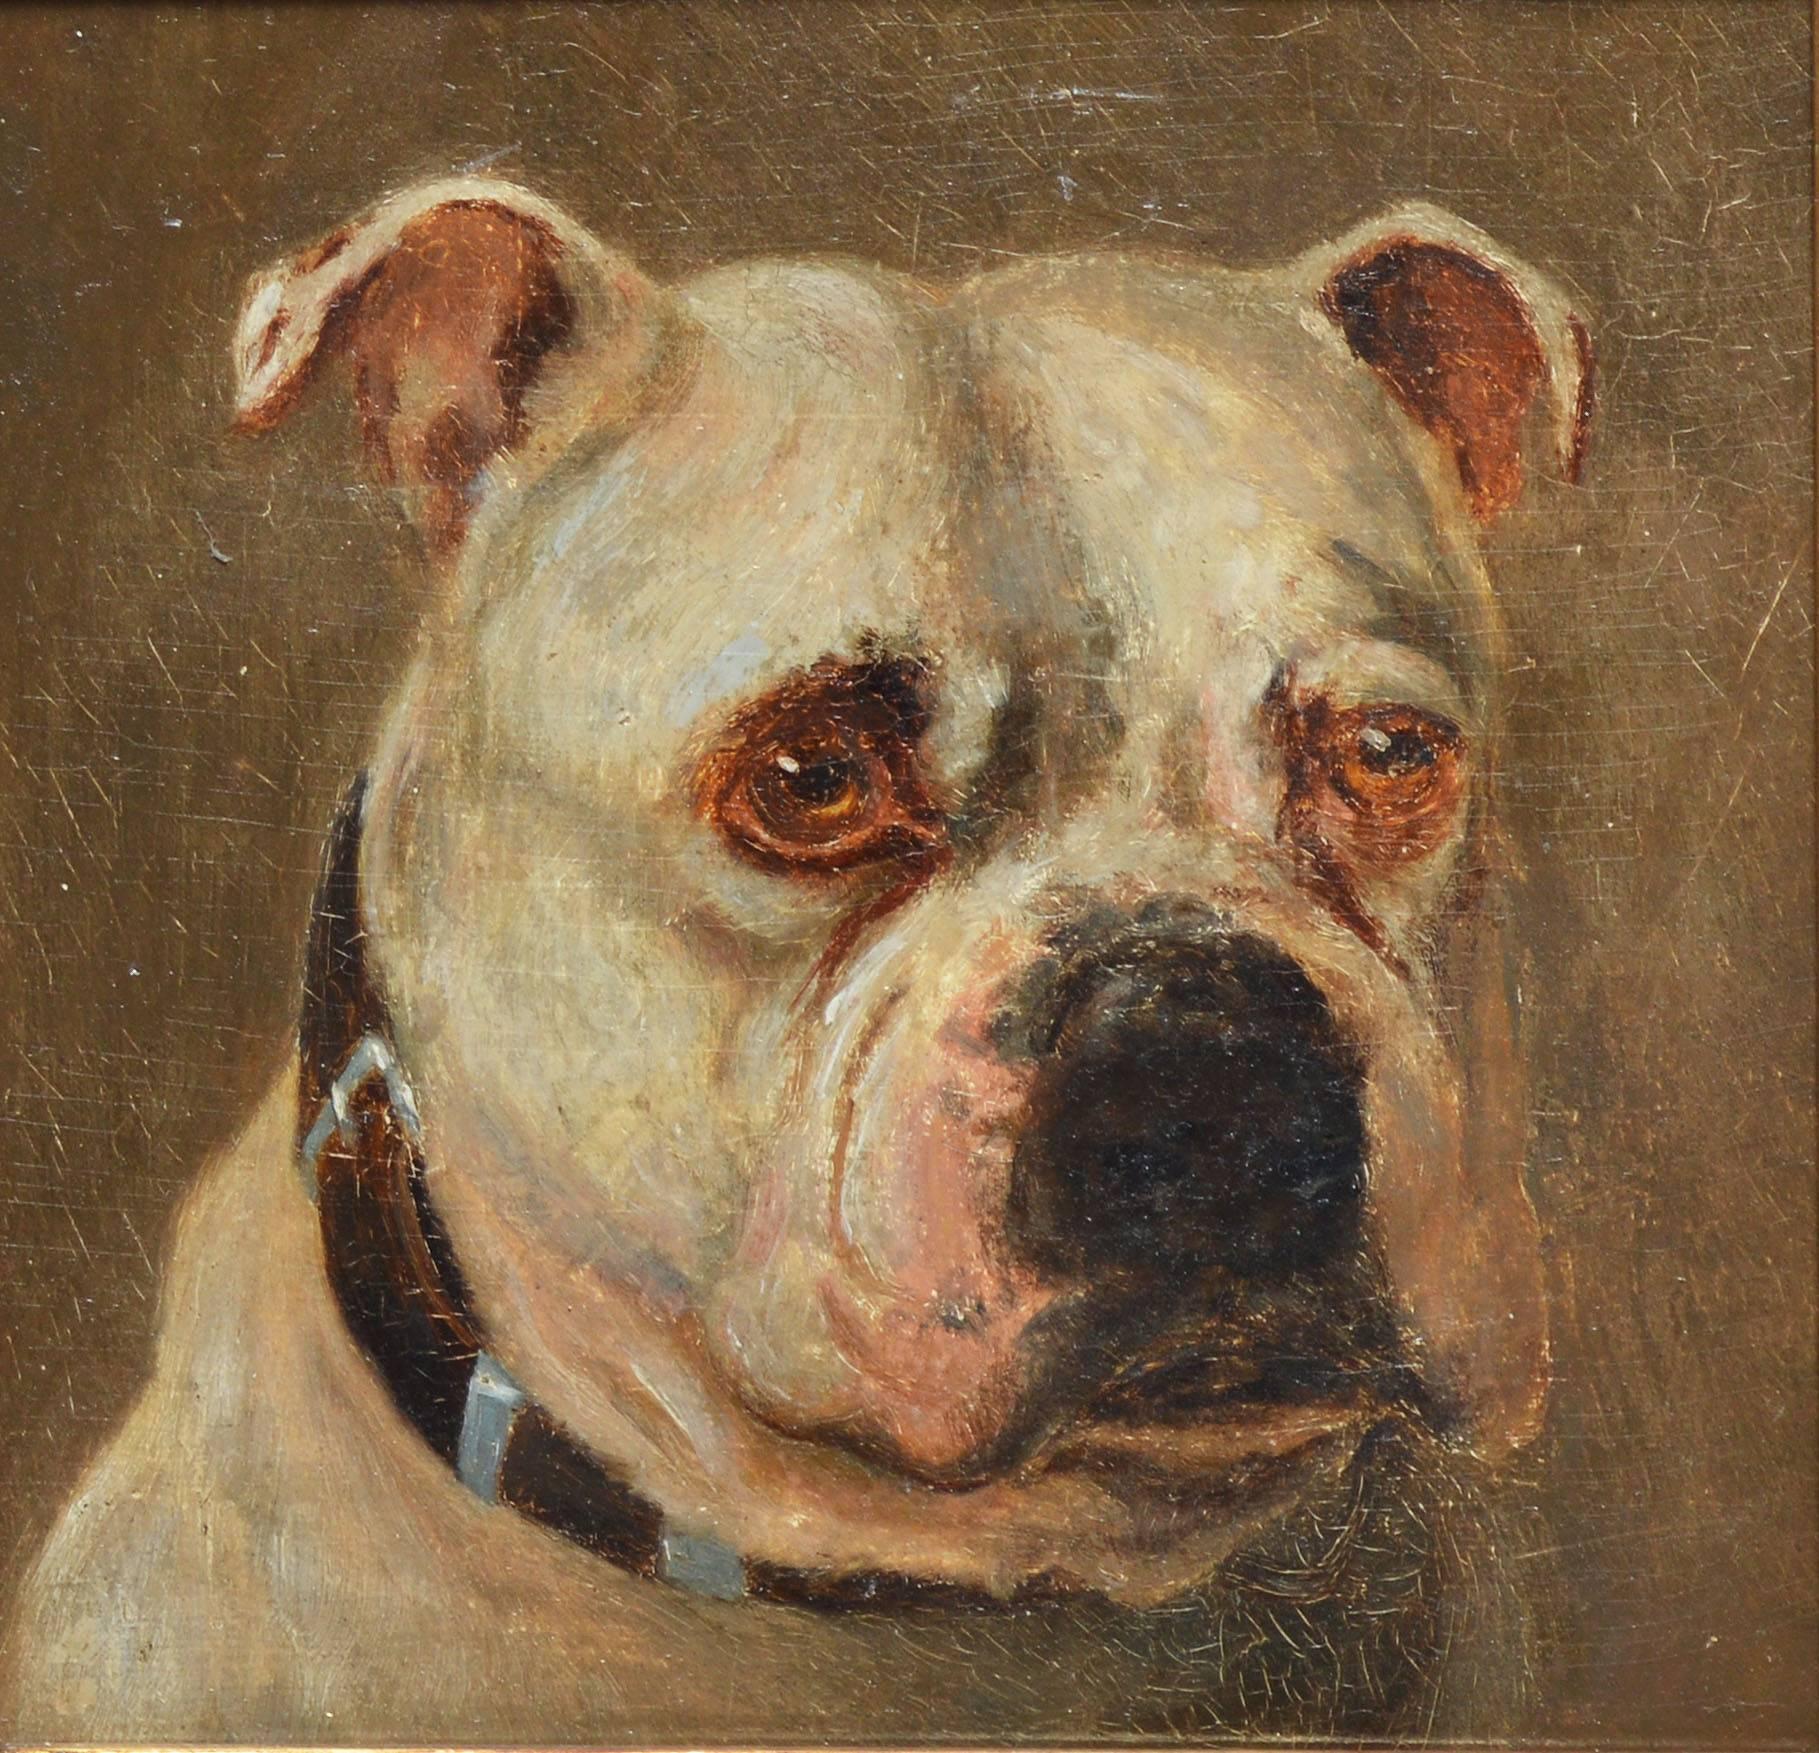 19th Century American School Portrait of a Dog - Realist Painting by Unknown